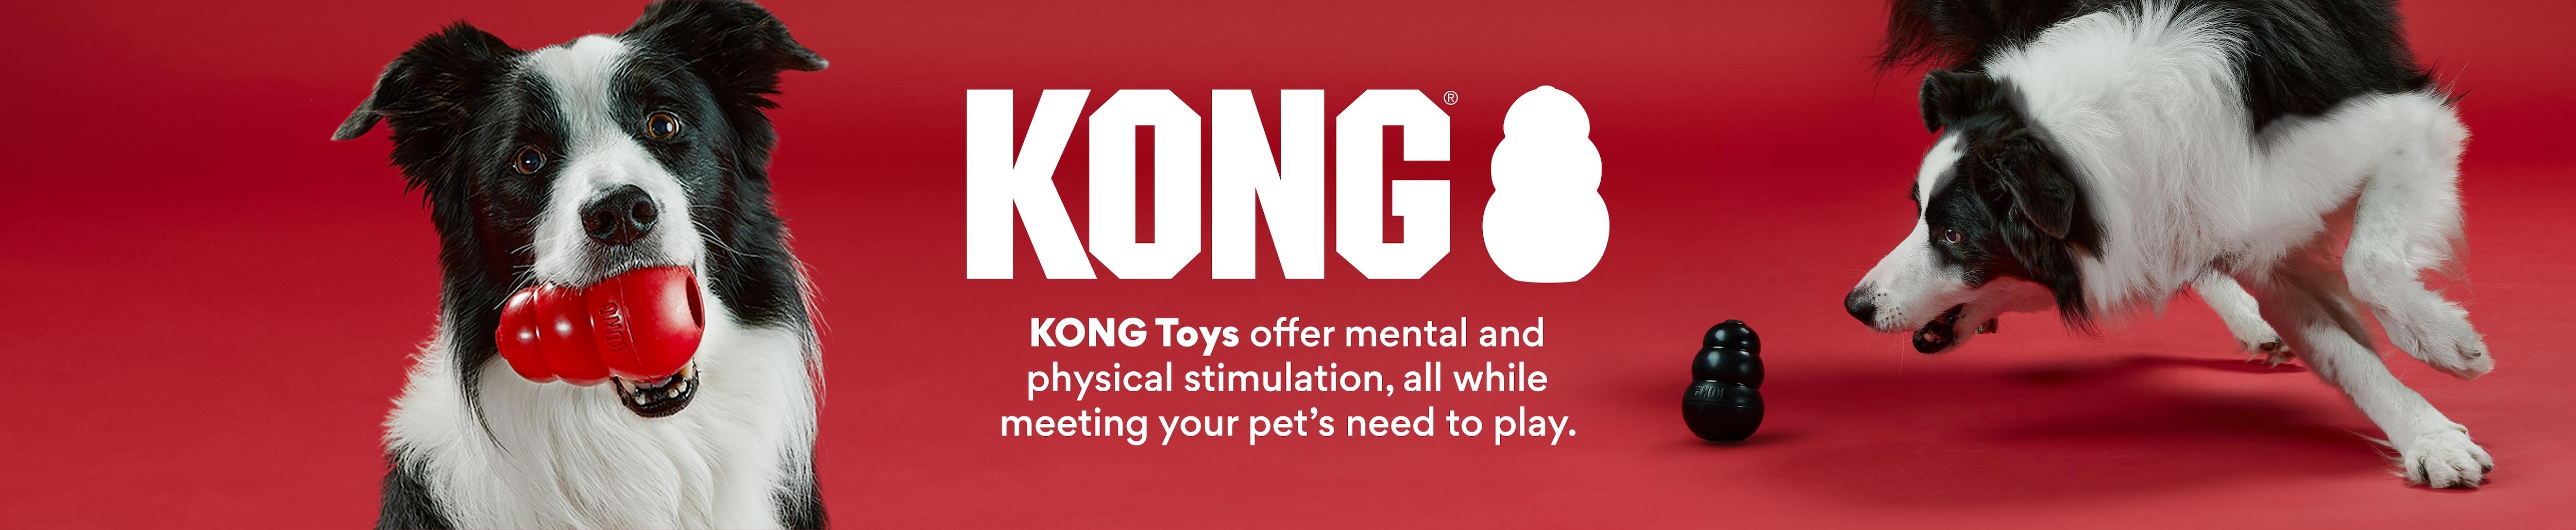 KONG toys offer mental and physical stimulation, all while meeting your pet's need to play.